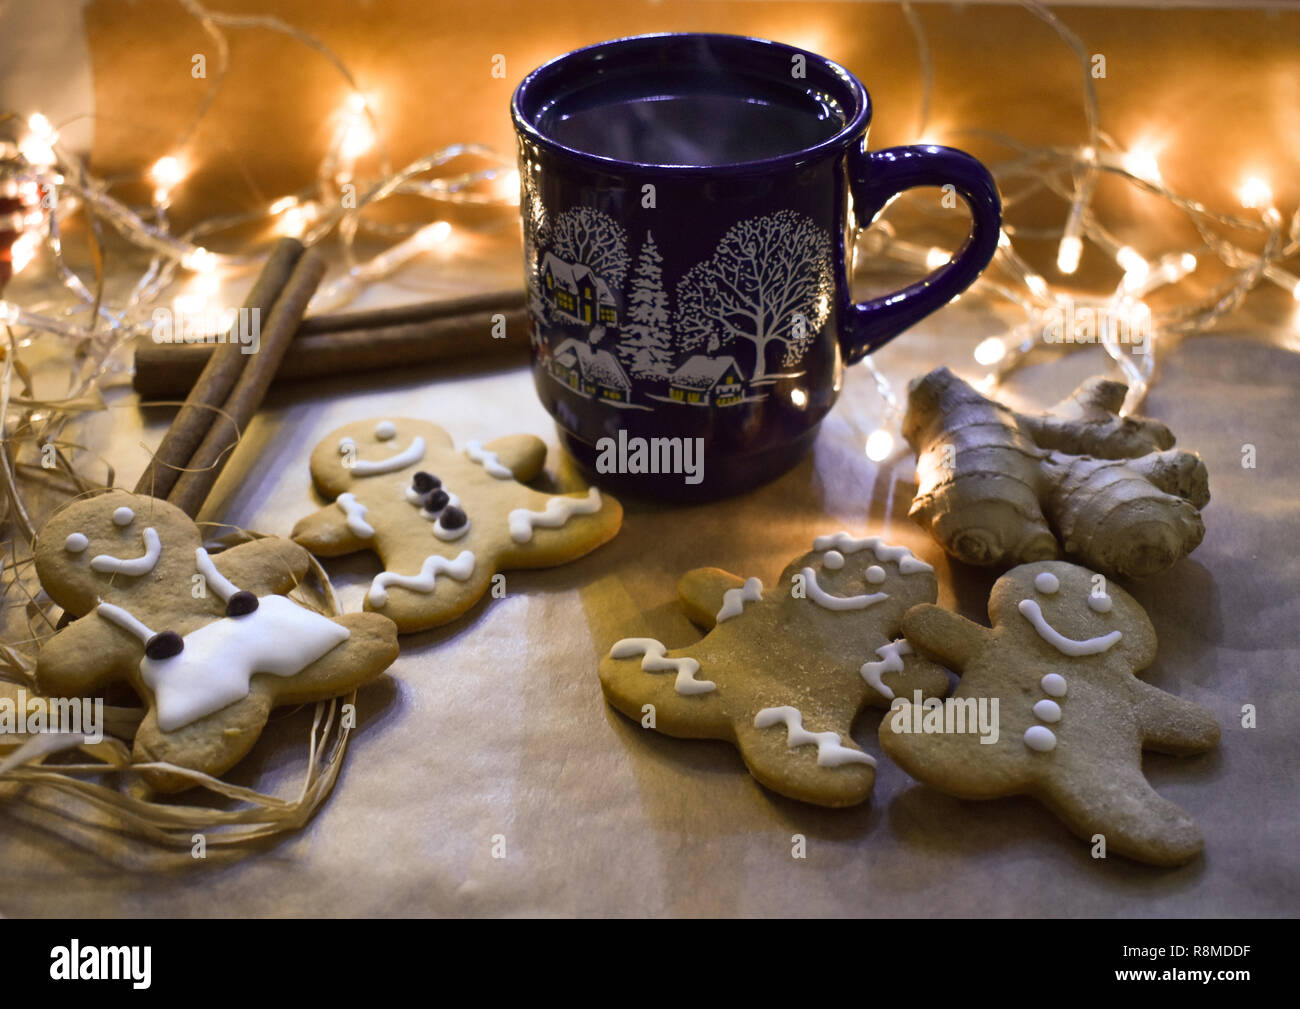 Home sweet home! Gingerbread man with Christmas lights and mulled wine, perfect. Stock Photo